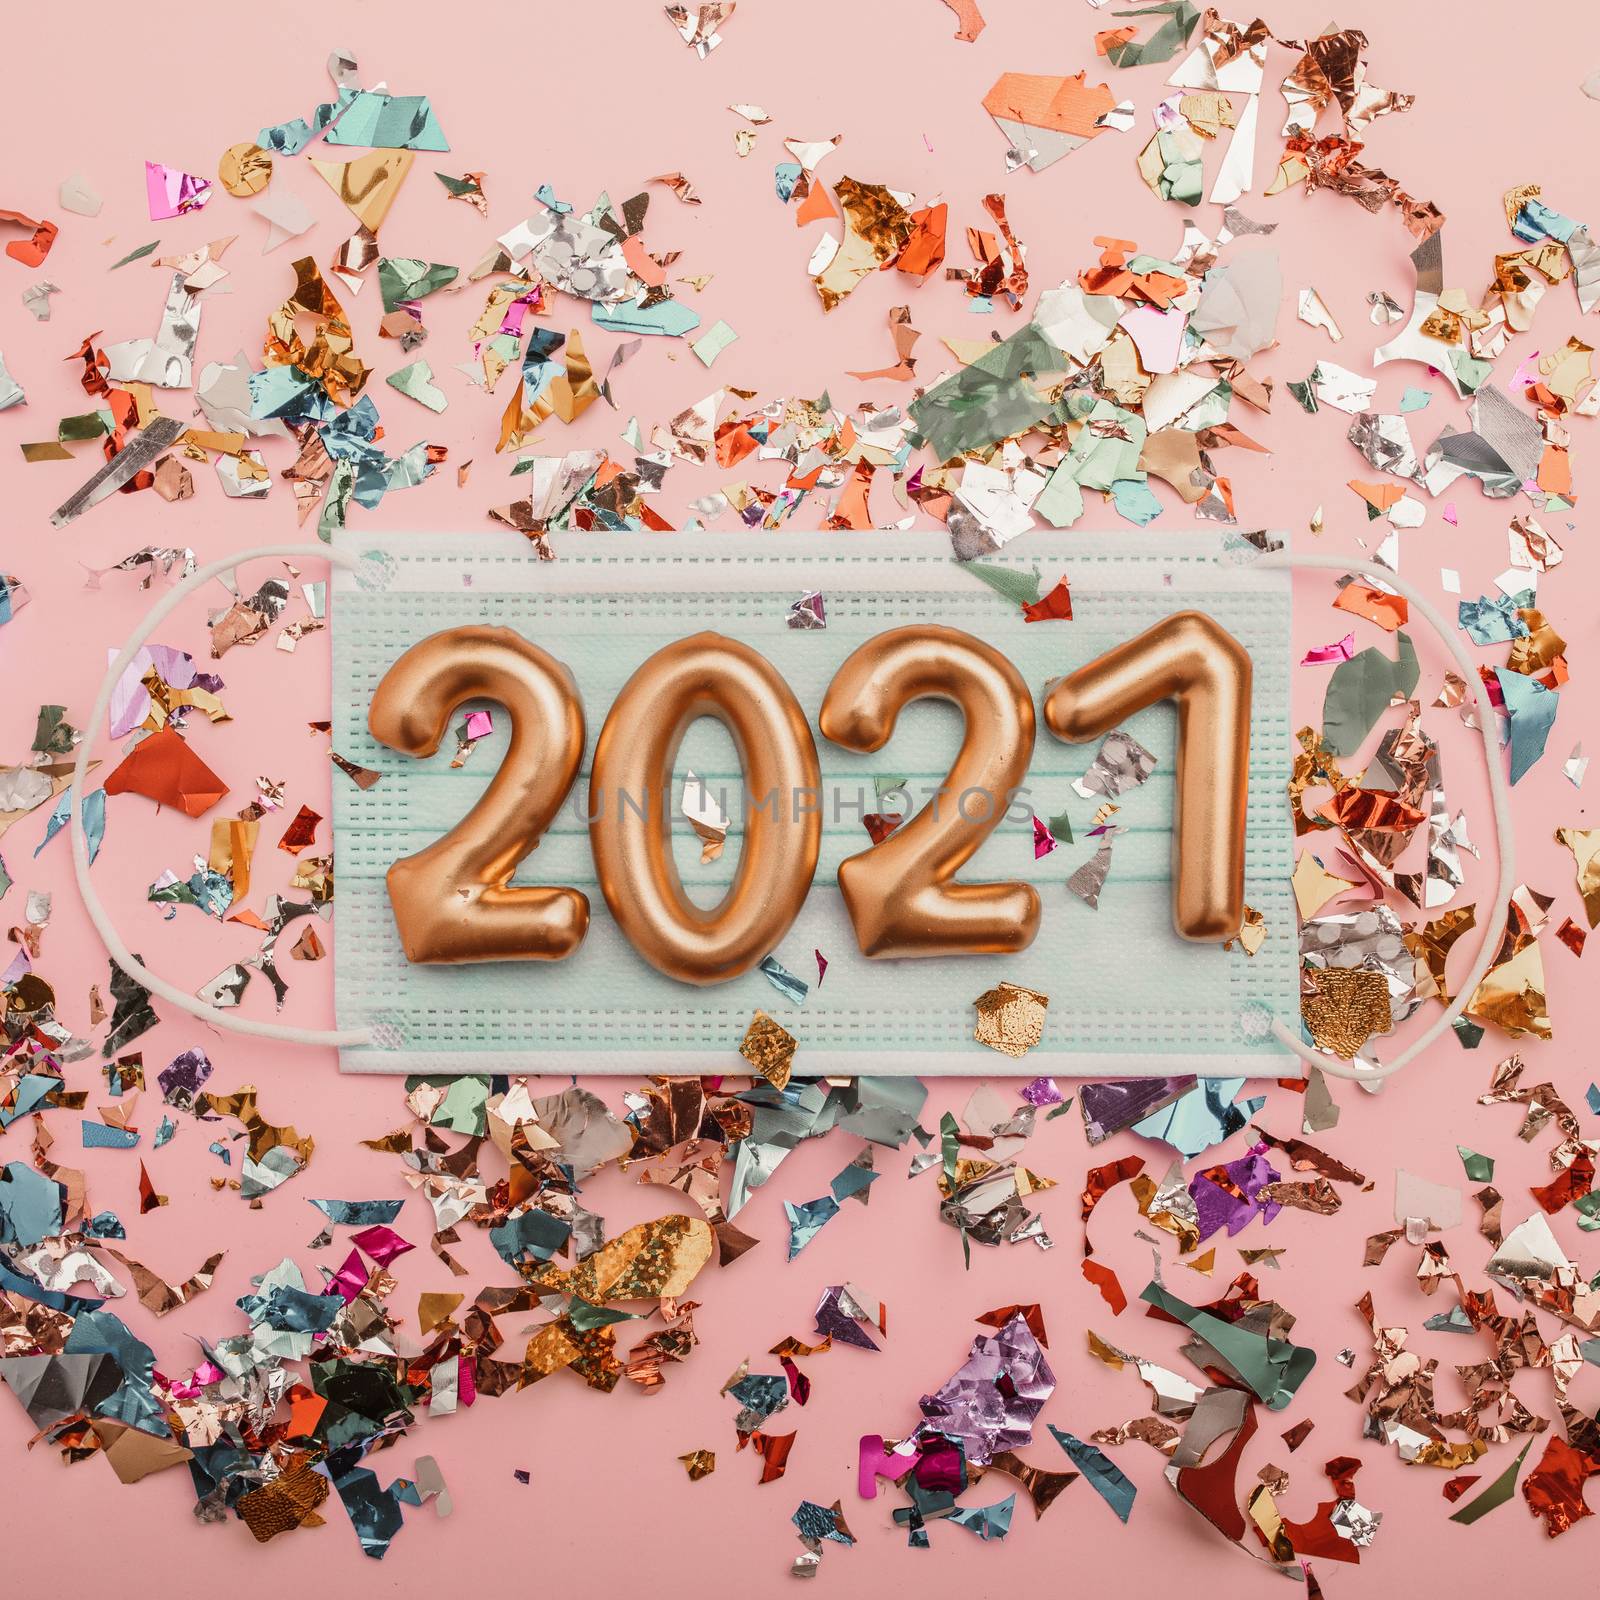 Happy new year 2021 with face mask and confetti by adamr